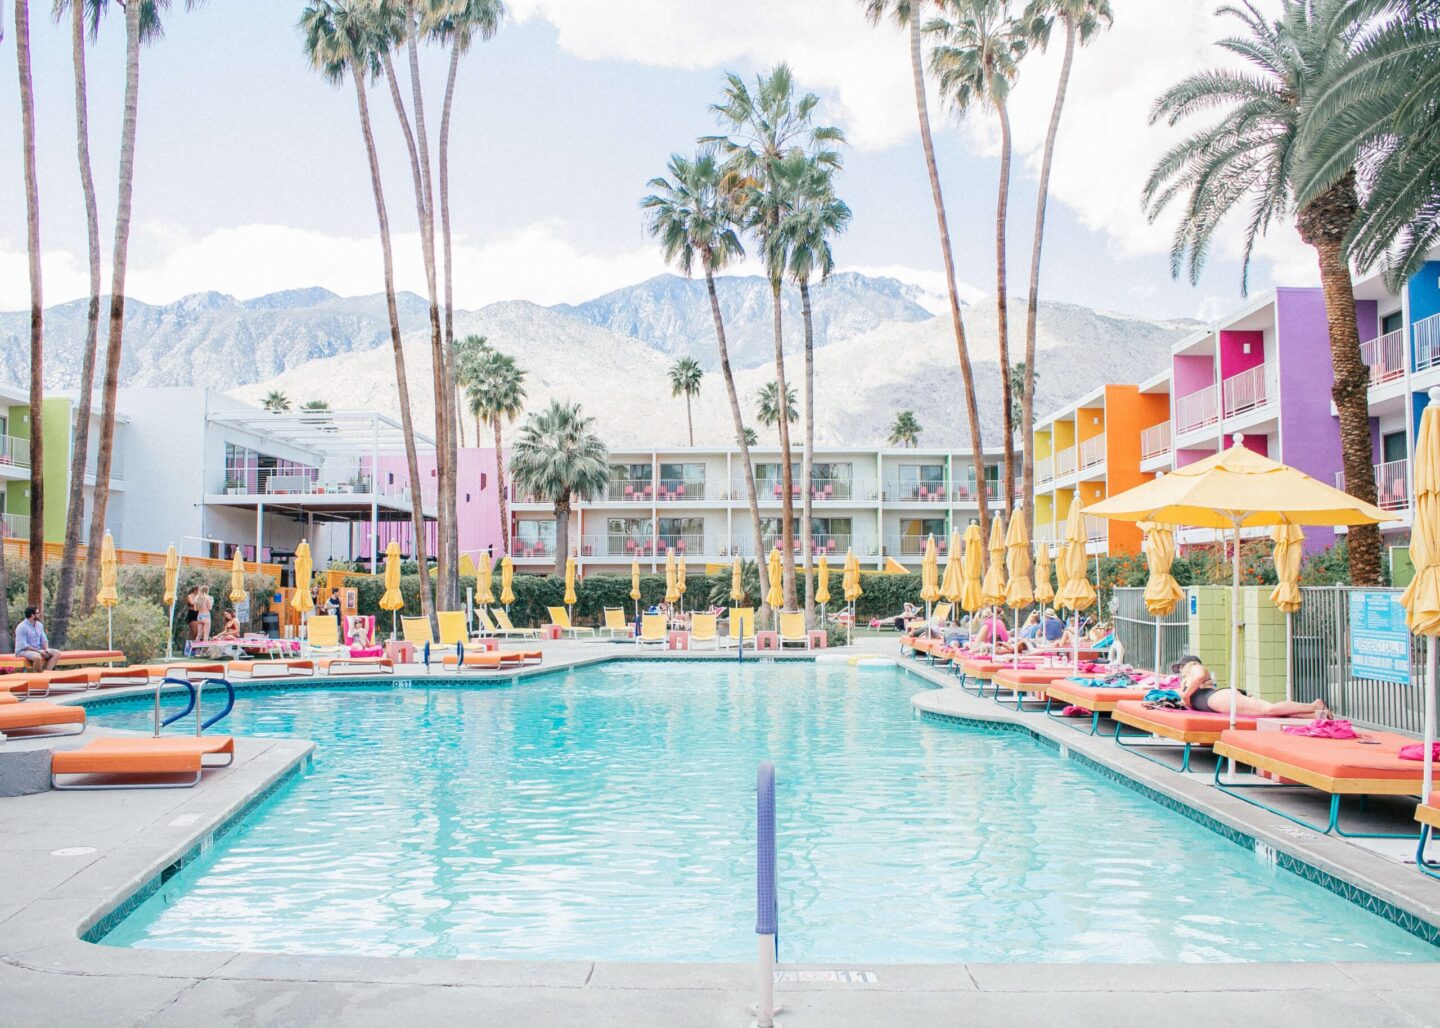 The Saguaro rainbow coloured hotel in Palm Springs